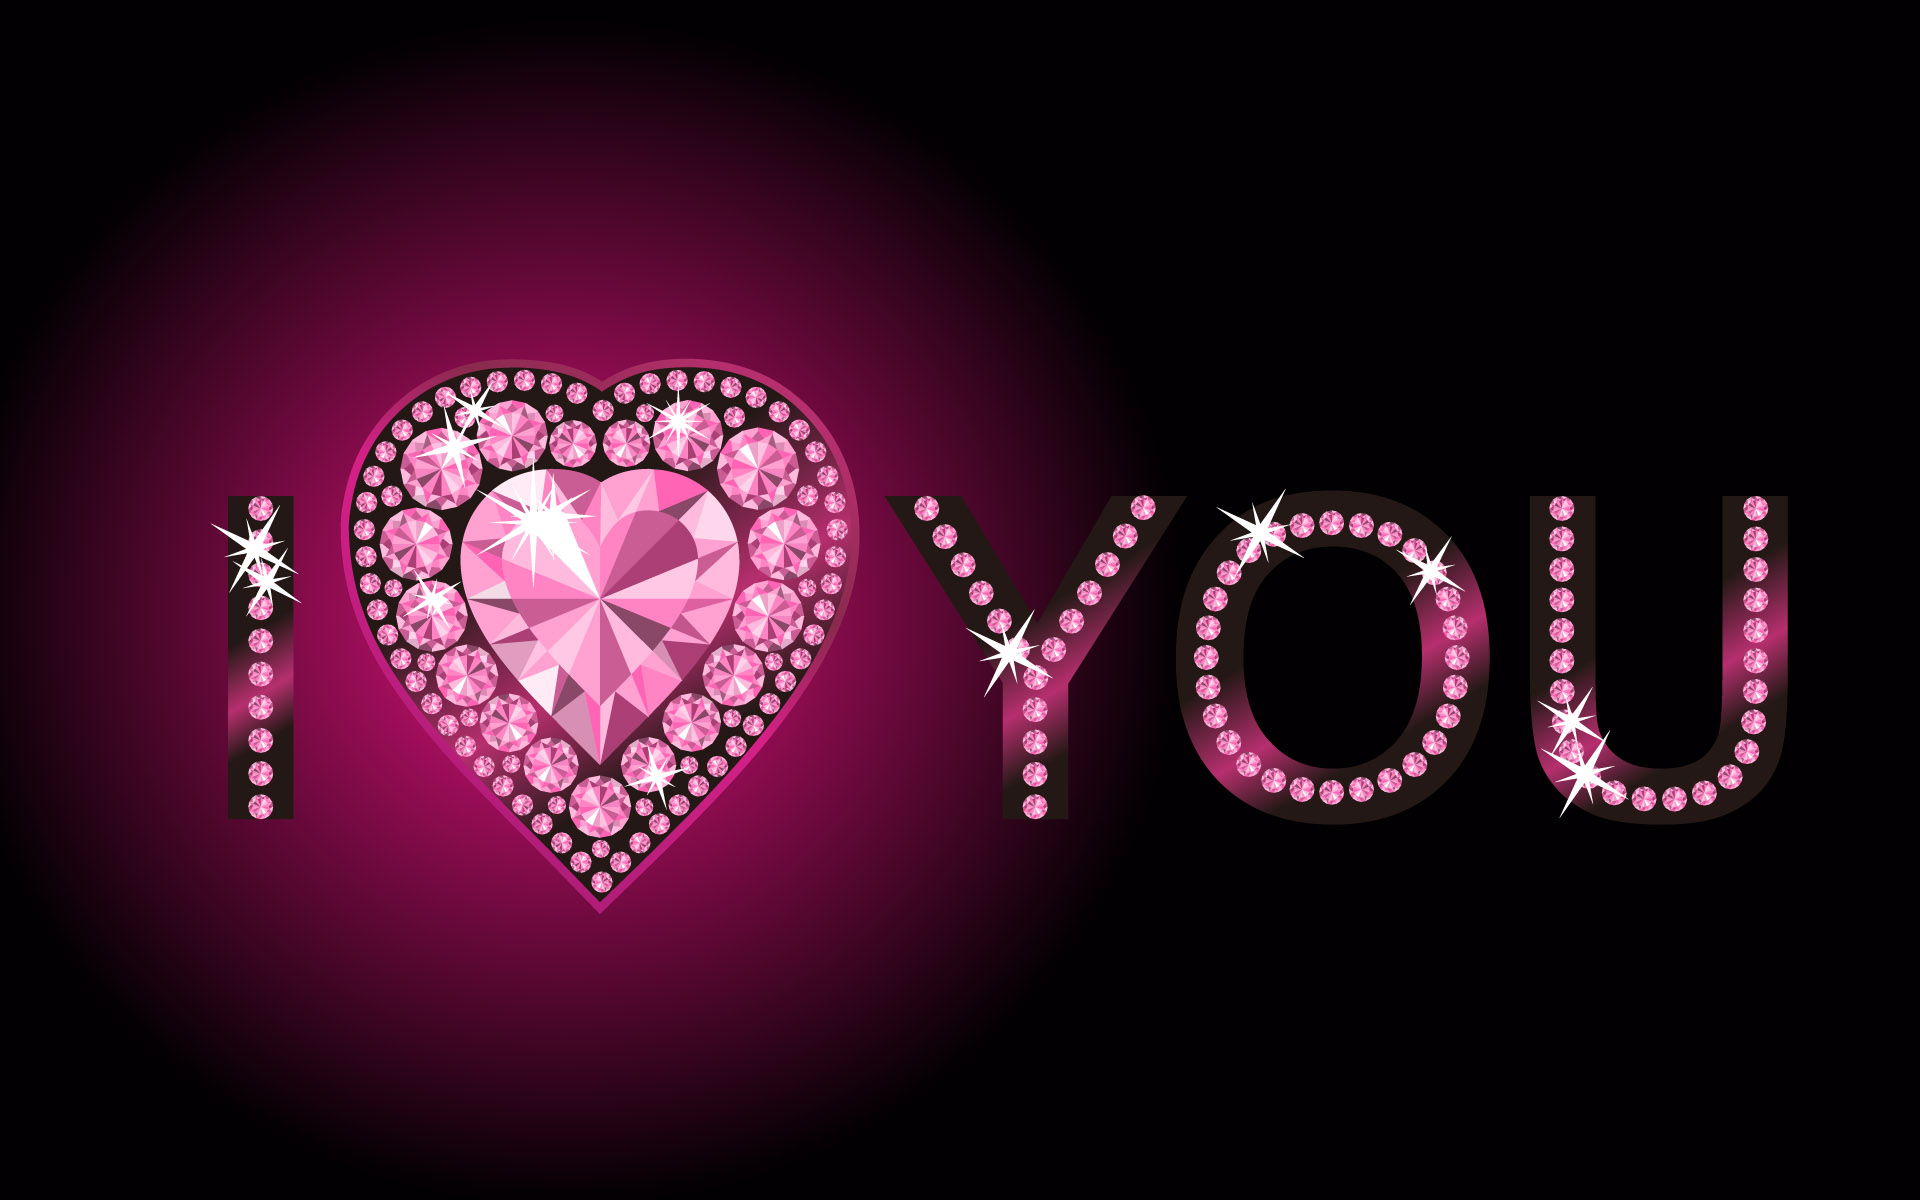 Love You Messages HD Wallpaper In Imageci